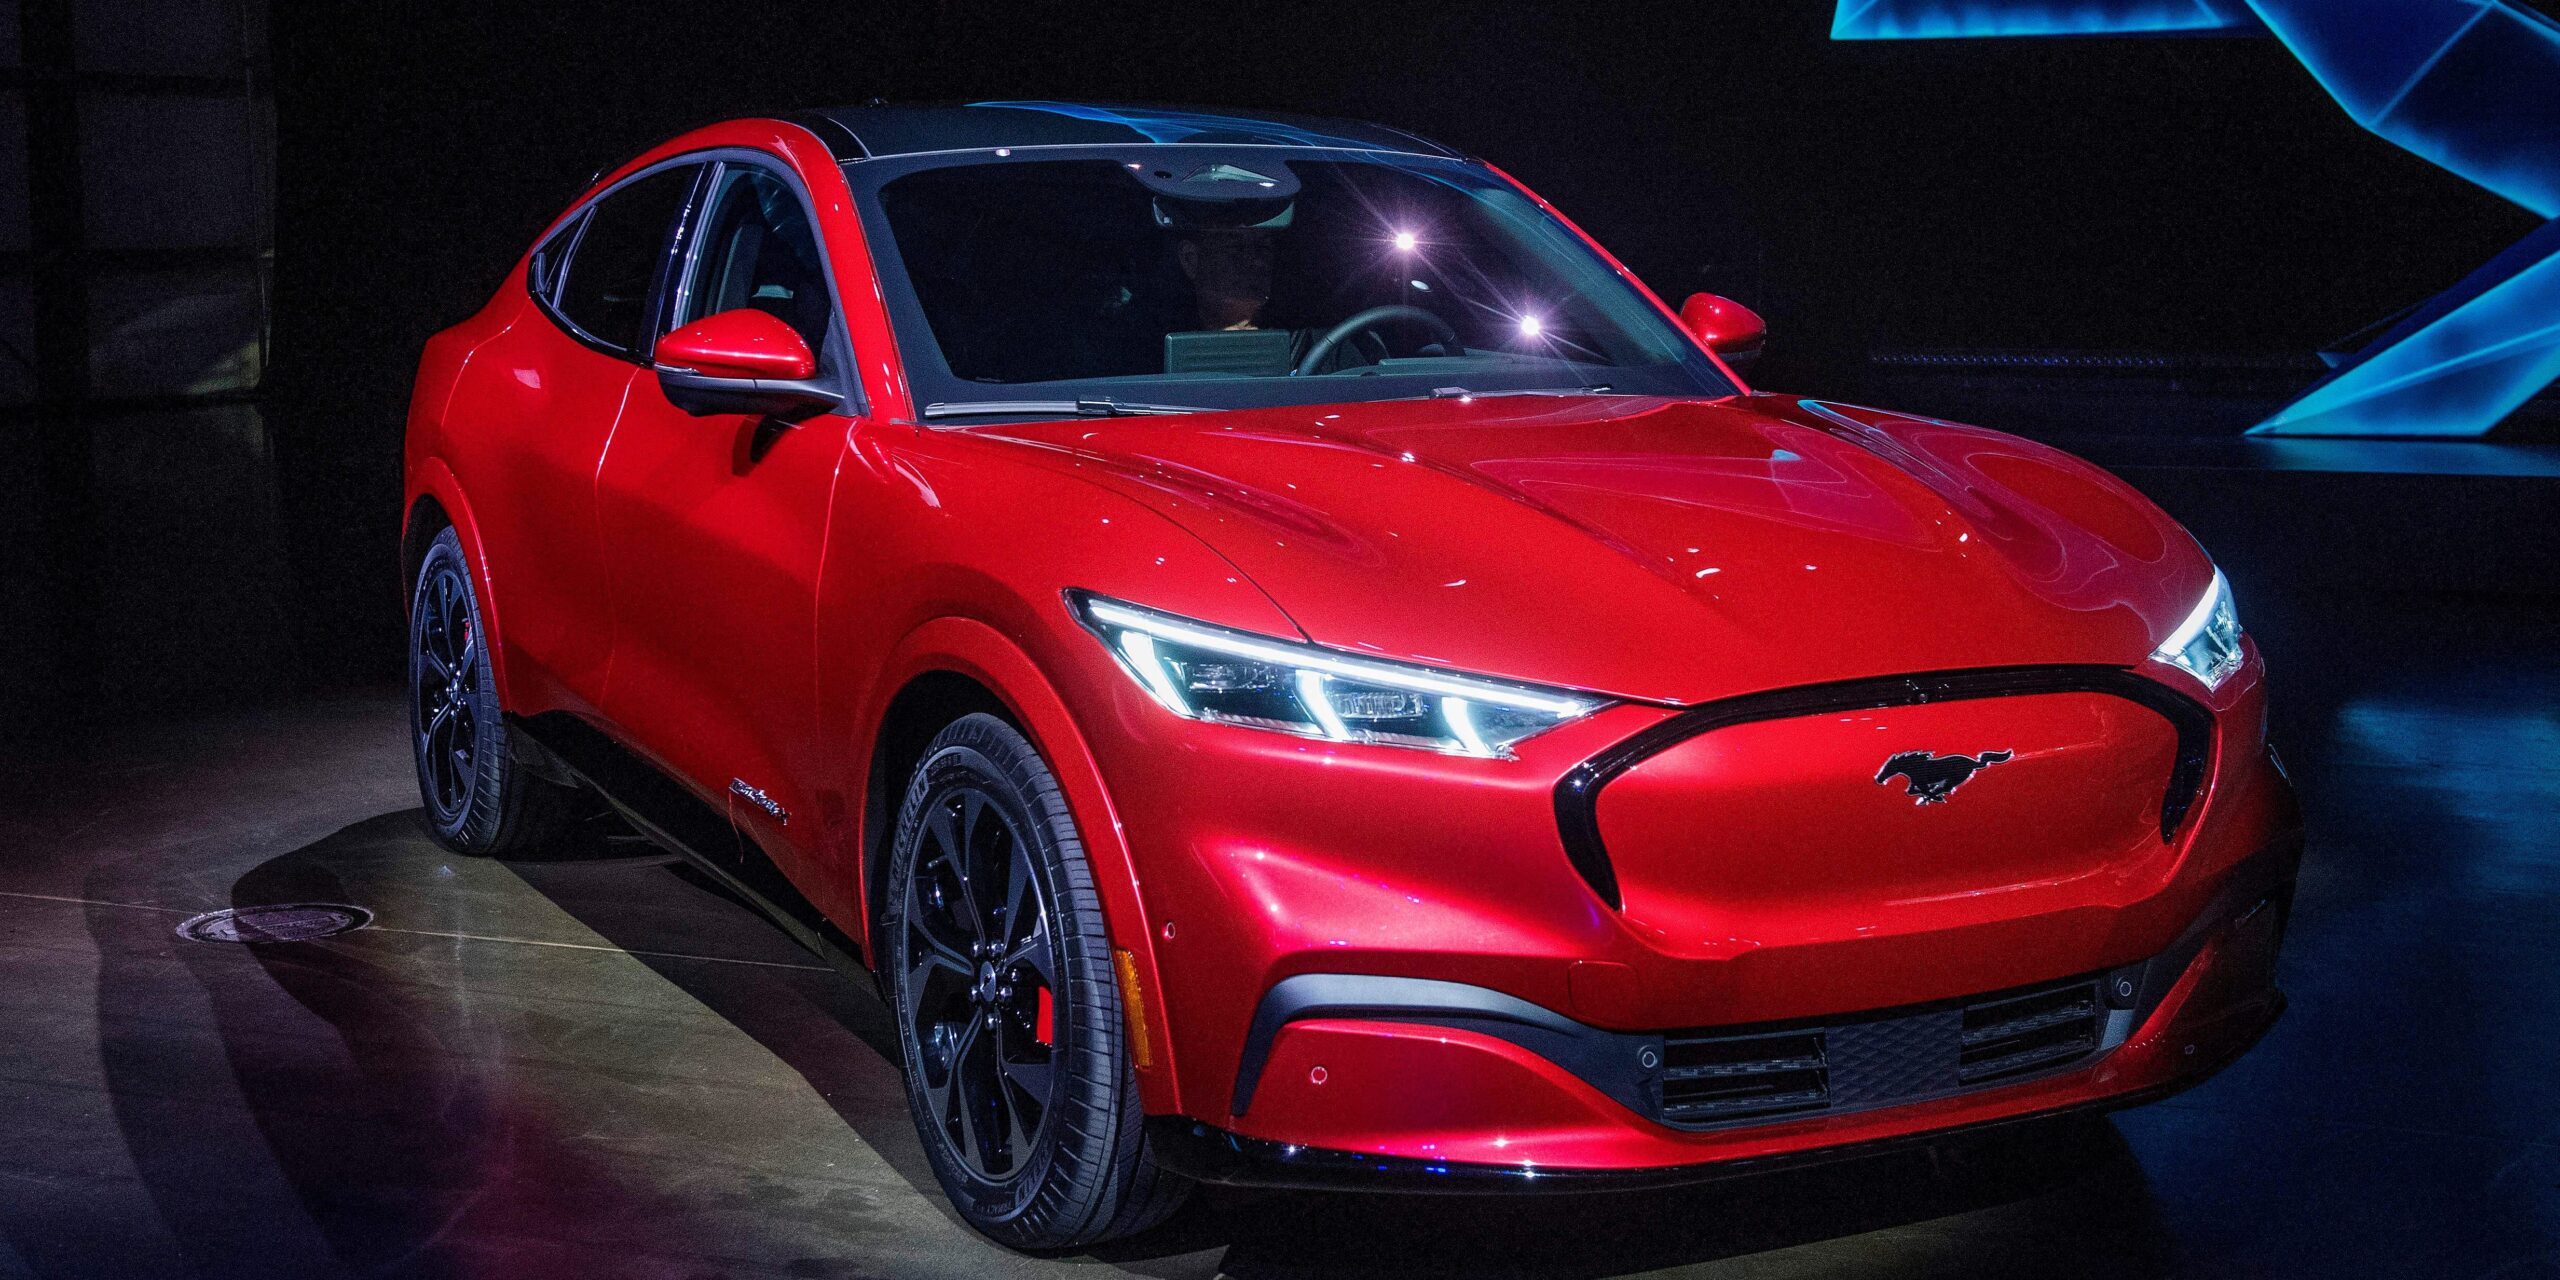 Wall Street analysts loved test driving the new Mustang Mach-E – and say it could be bad news for Tesla investors